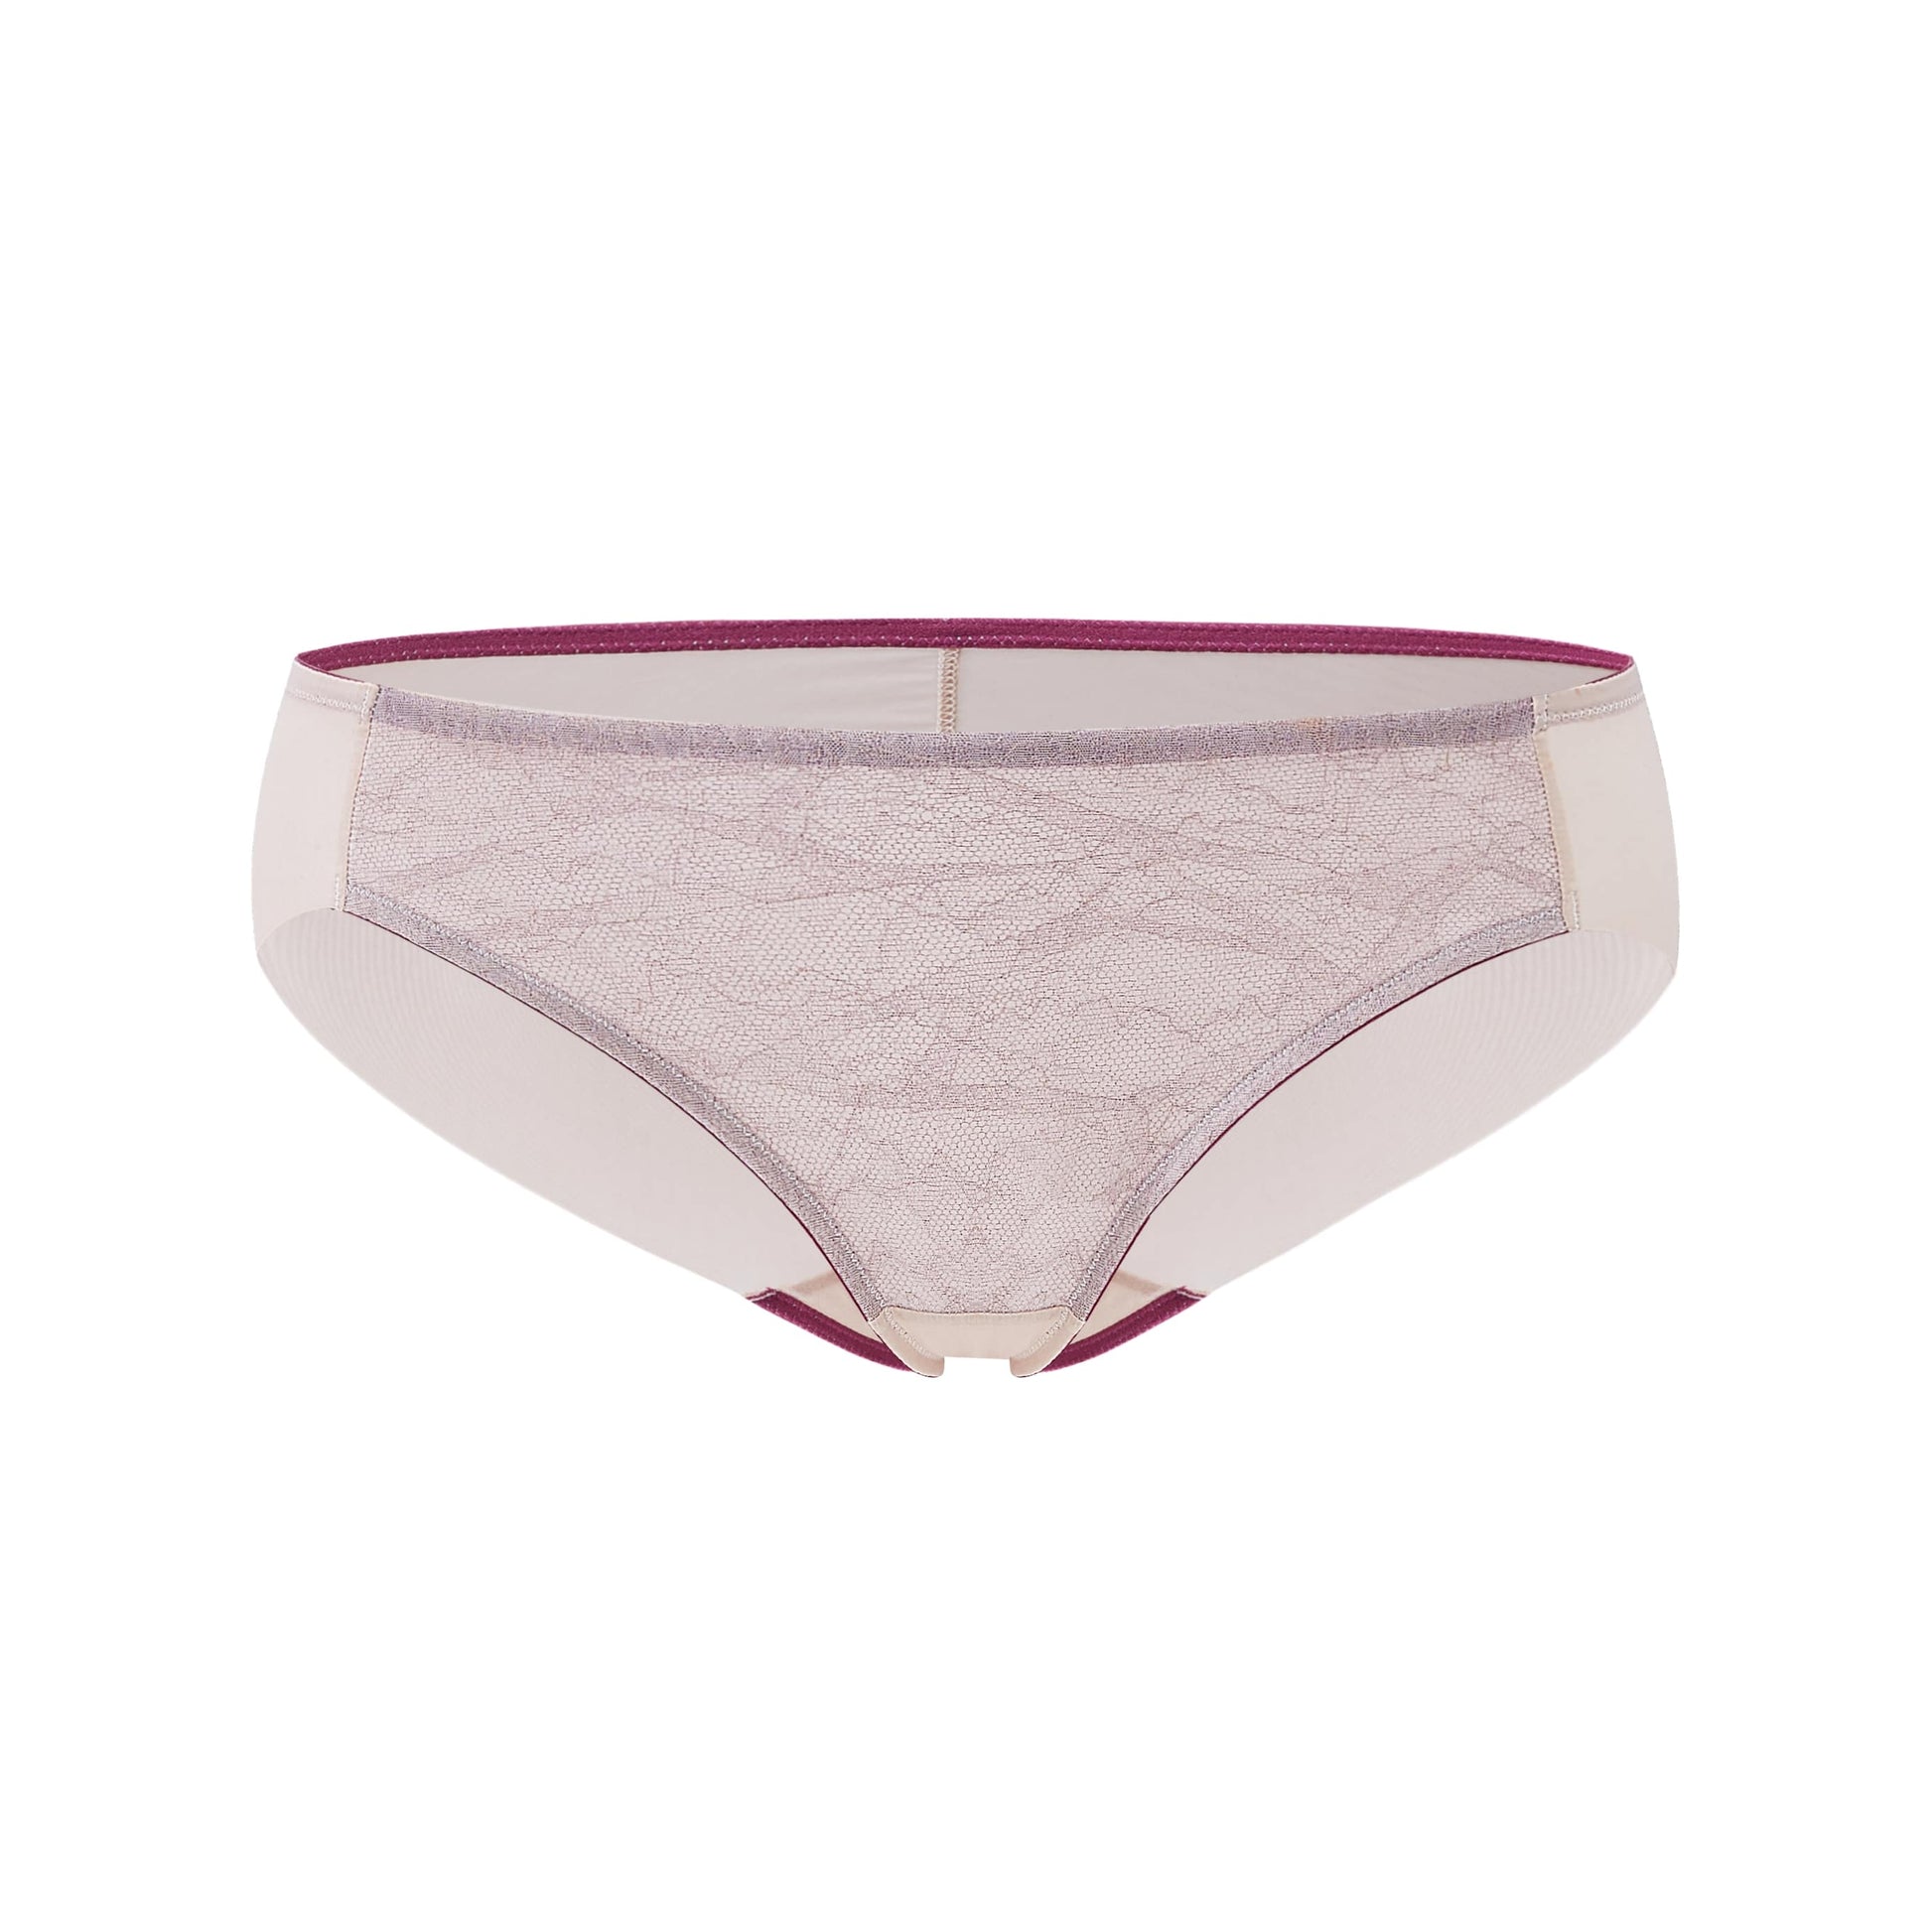 a pink lace brief